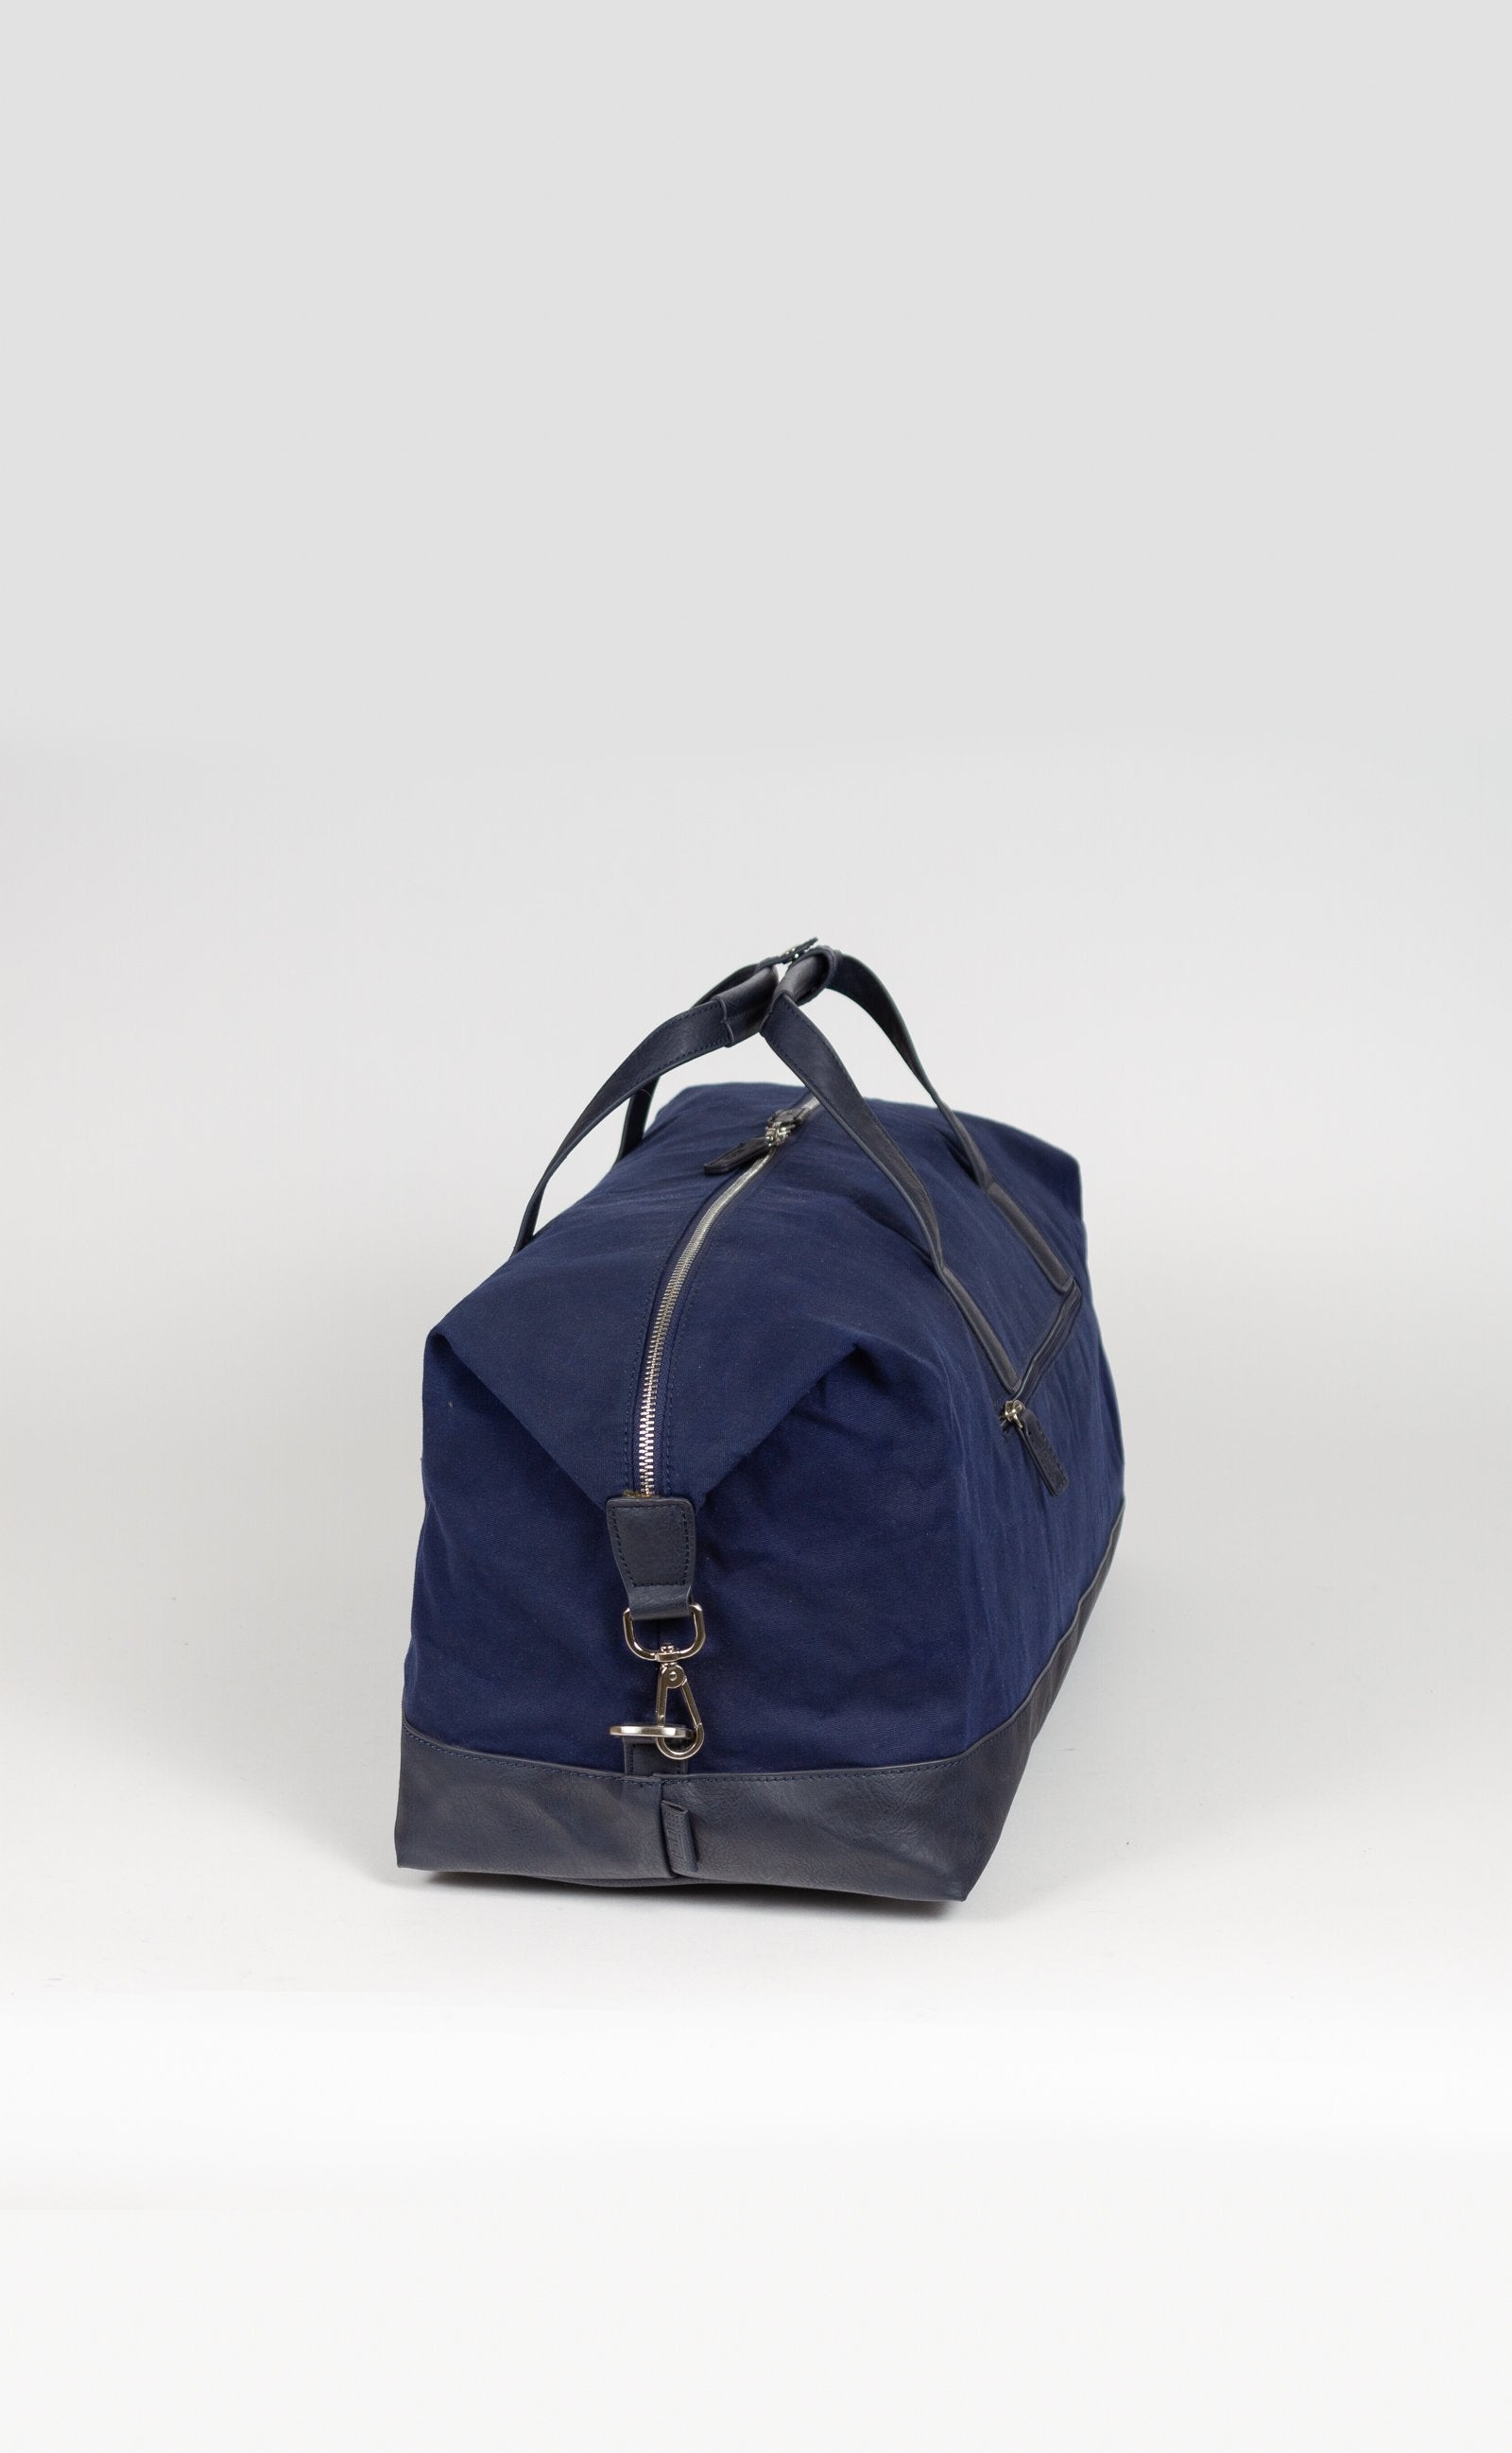 BEON.COM.AU The Jost Goteborg Travel Bag is a vegan leather and canvas bag.  Made of premium cotton, linen and raffia Large spacious compartment with internal organisation Outer compartment with zipper Shoulder strap adjustable and removable 25cm x 52cm x 24cm 25L Volume  Bags Jost at BEON.COM.AU